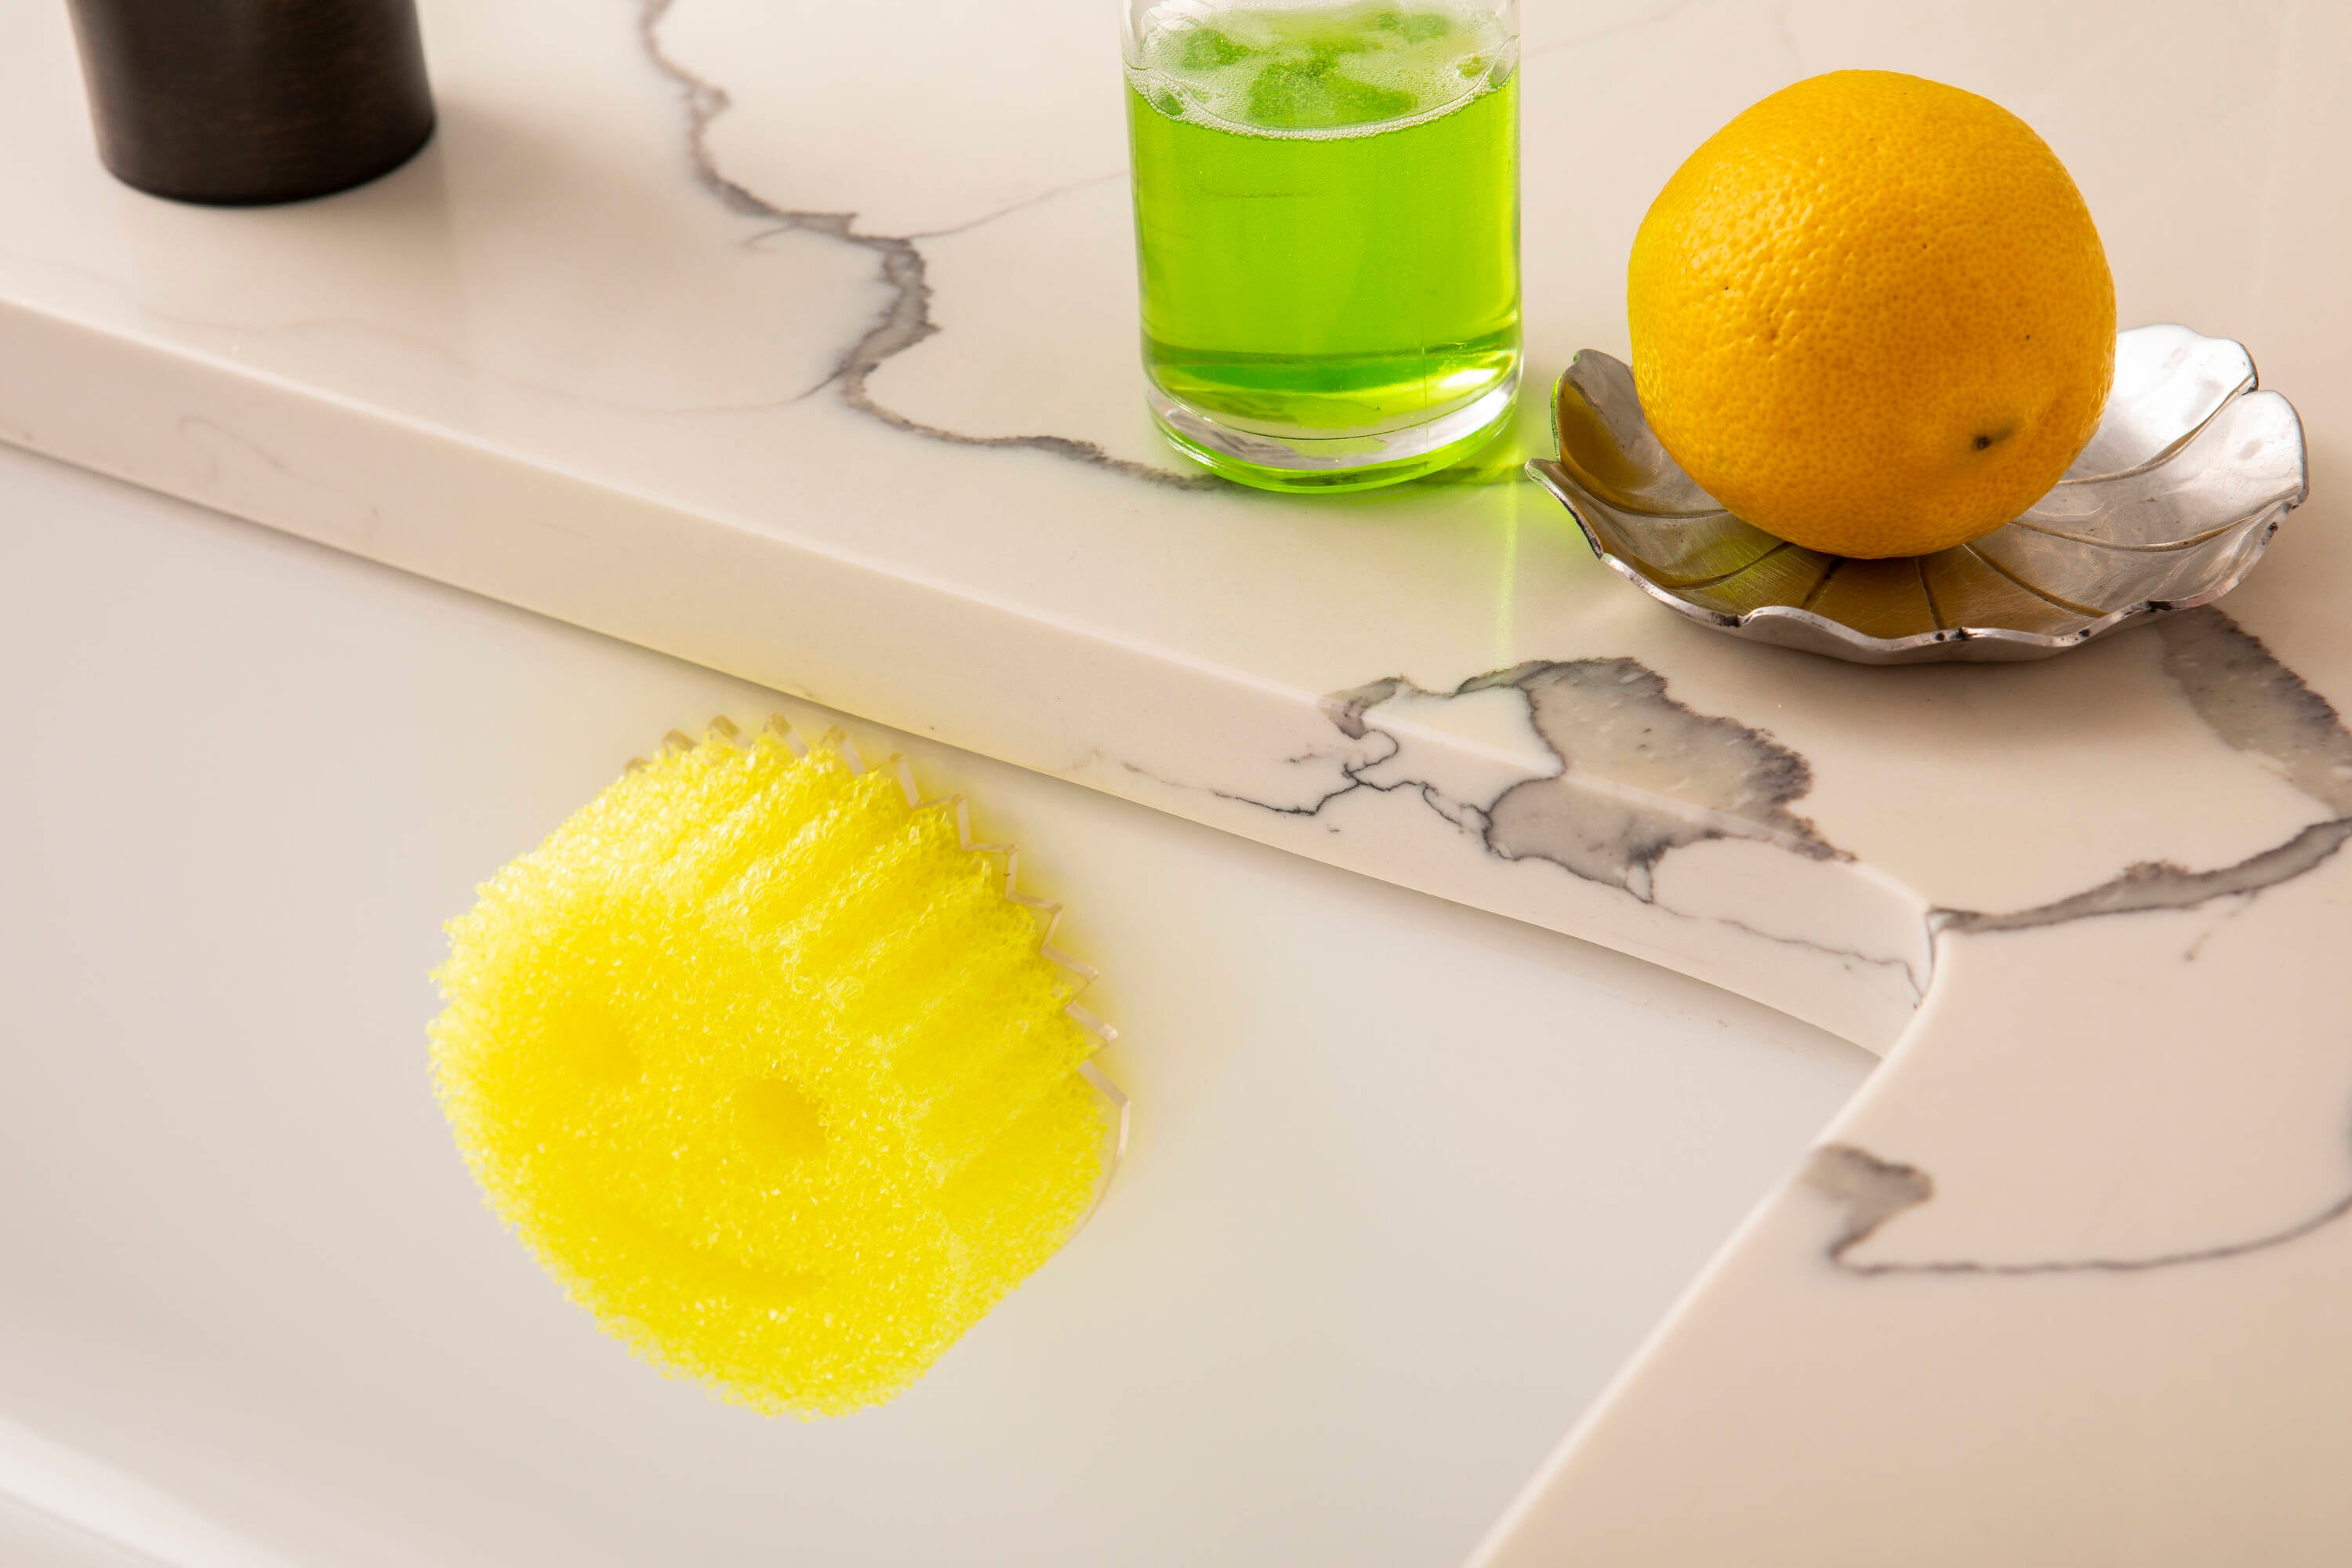 Scrub Daddy Colors 6ct + Daddy Caddy - Scratch-Free Multipurpose Dish  Sponge + Sponge Holder - BPA Free & Made with Polymer Foam - Stain & Odor